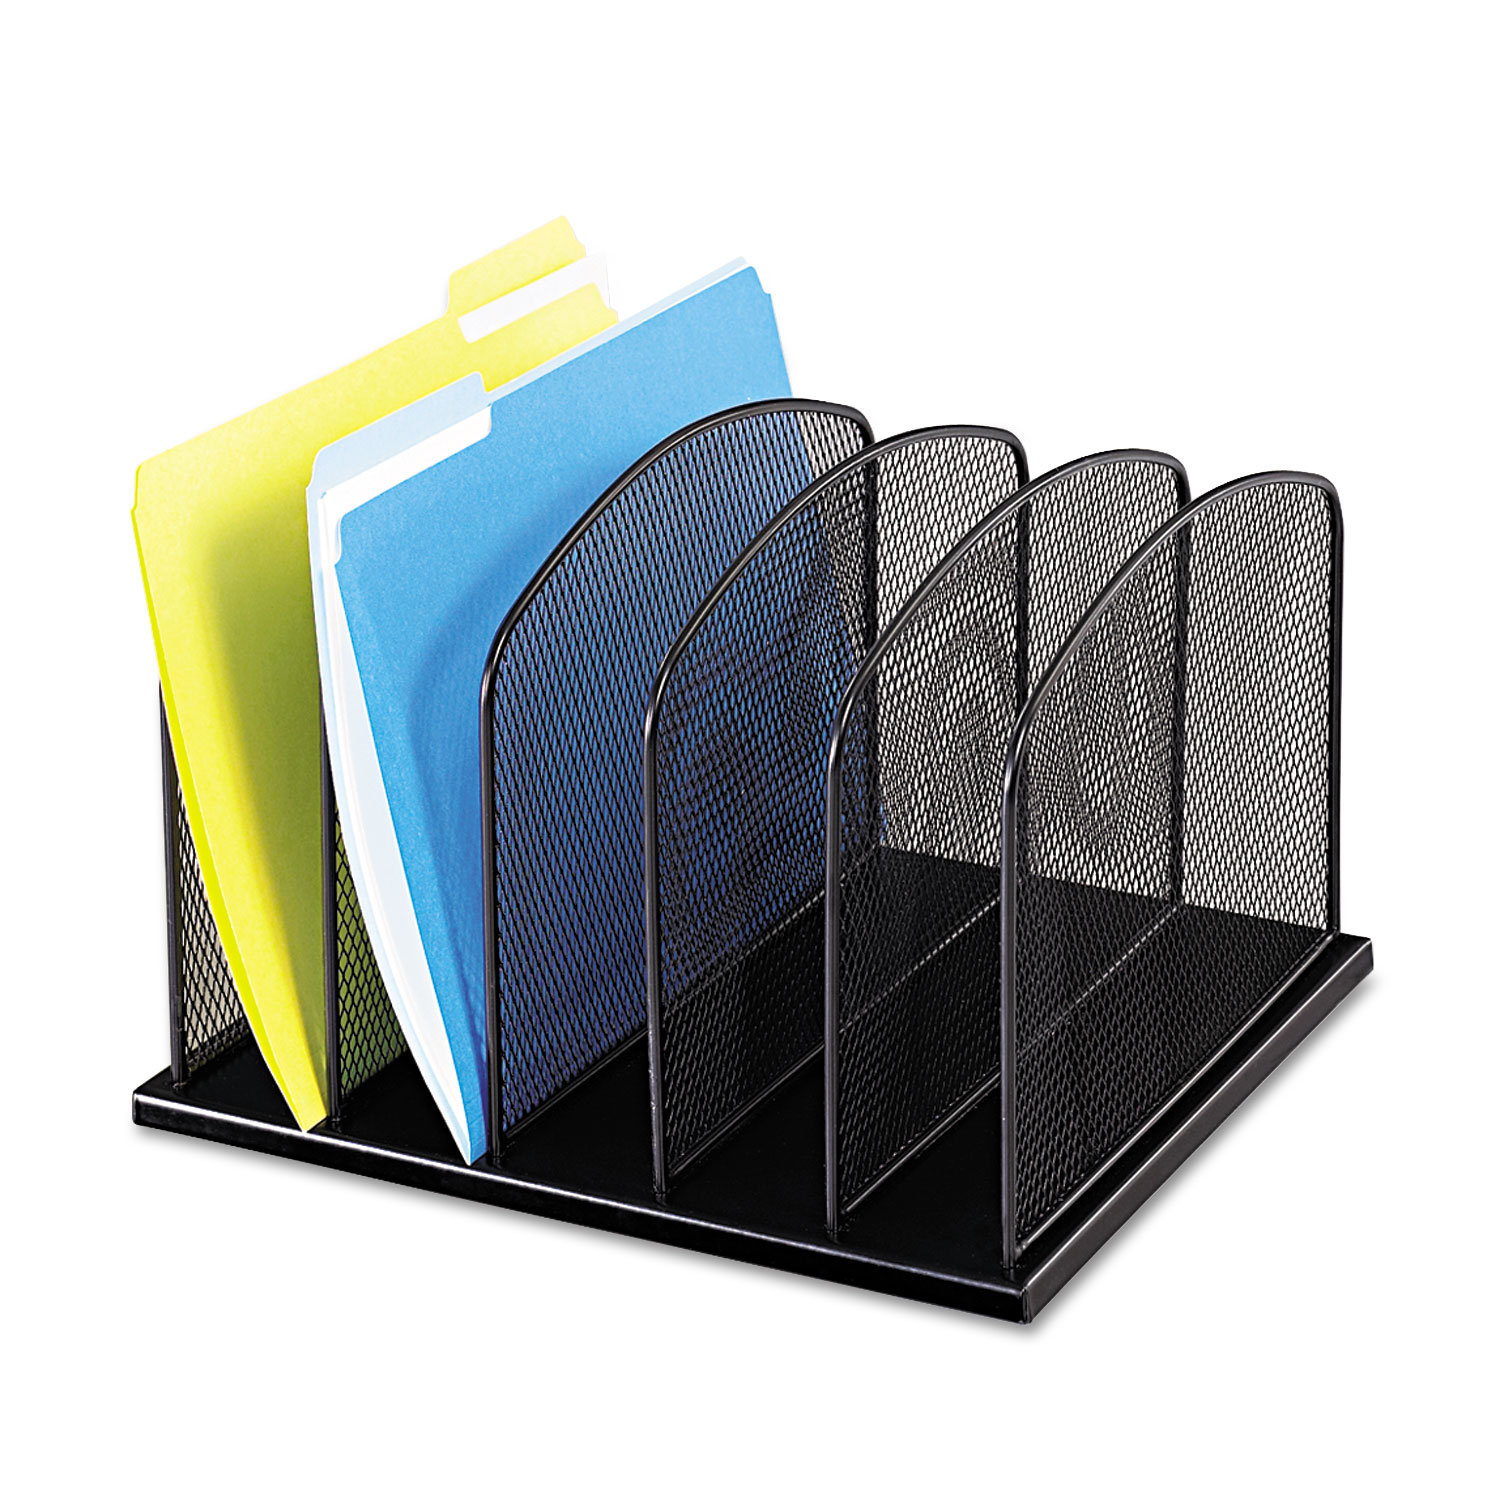 Onyx Mesh Desk Organizer with Upright Sections, 5 Sections, Letter to Legal Size Files, 12.5" x 11.25" x 8.25", Black